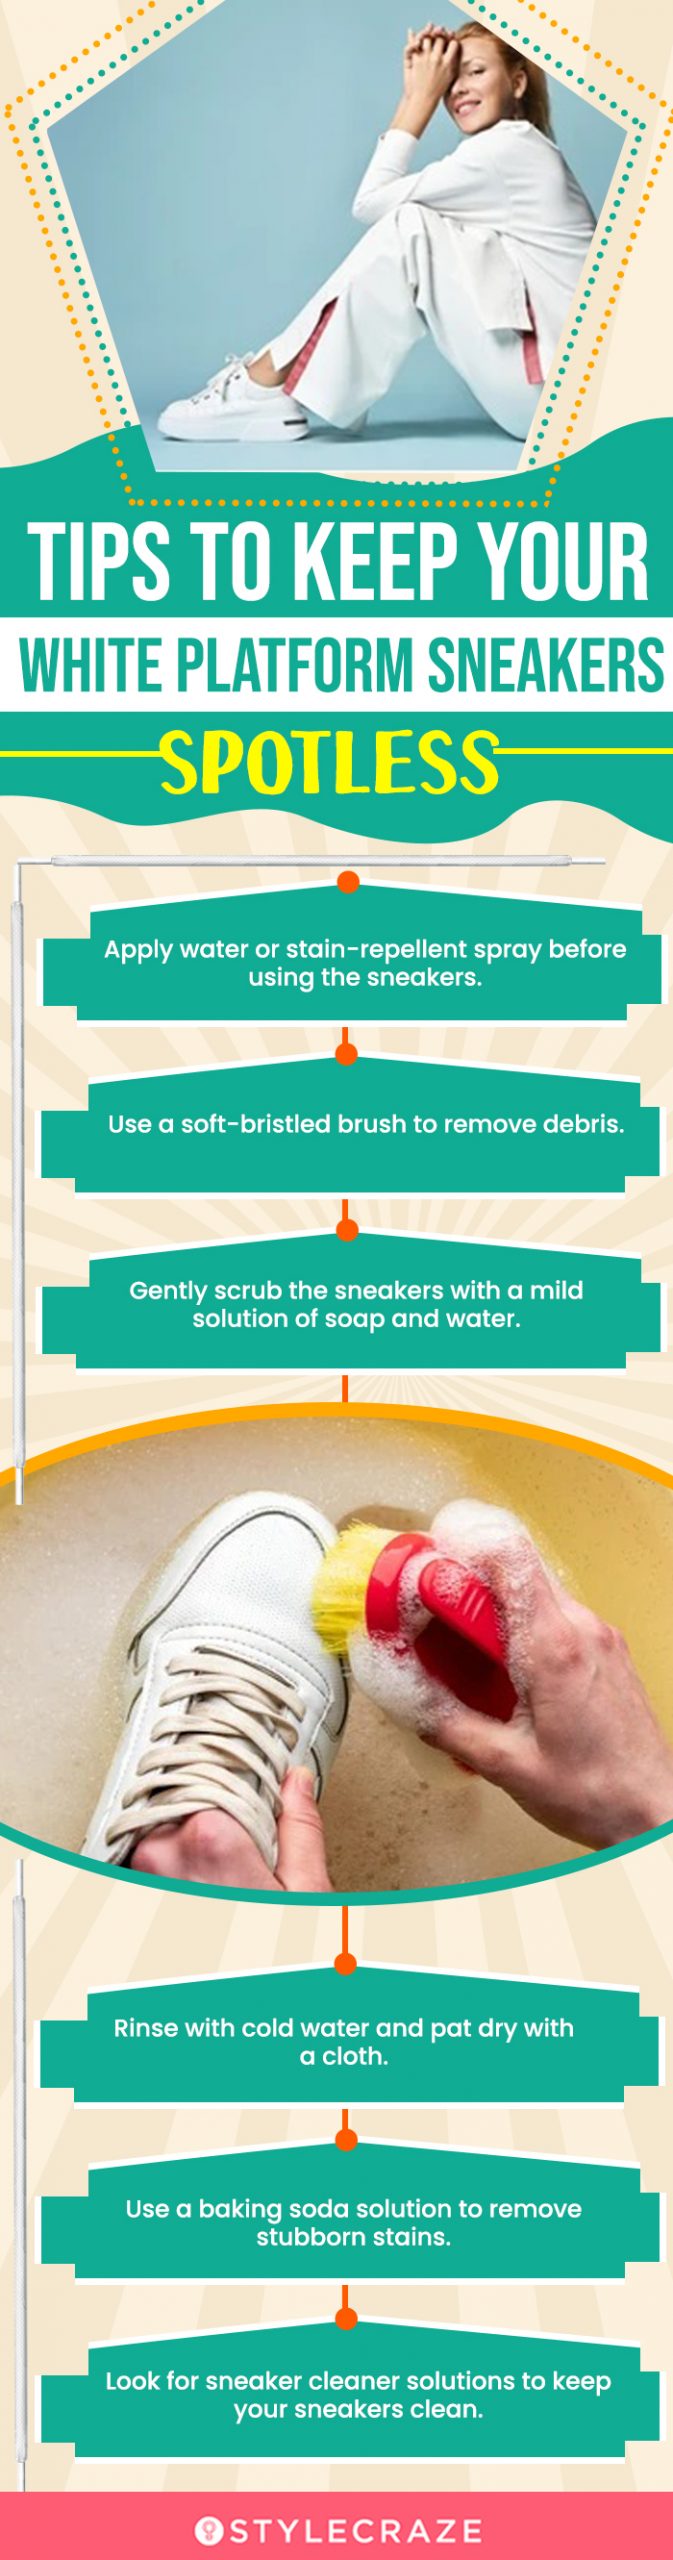 Tips To Keep Your White Platform Sneakers Spotless (infographic)